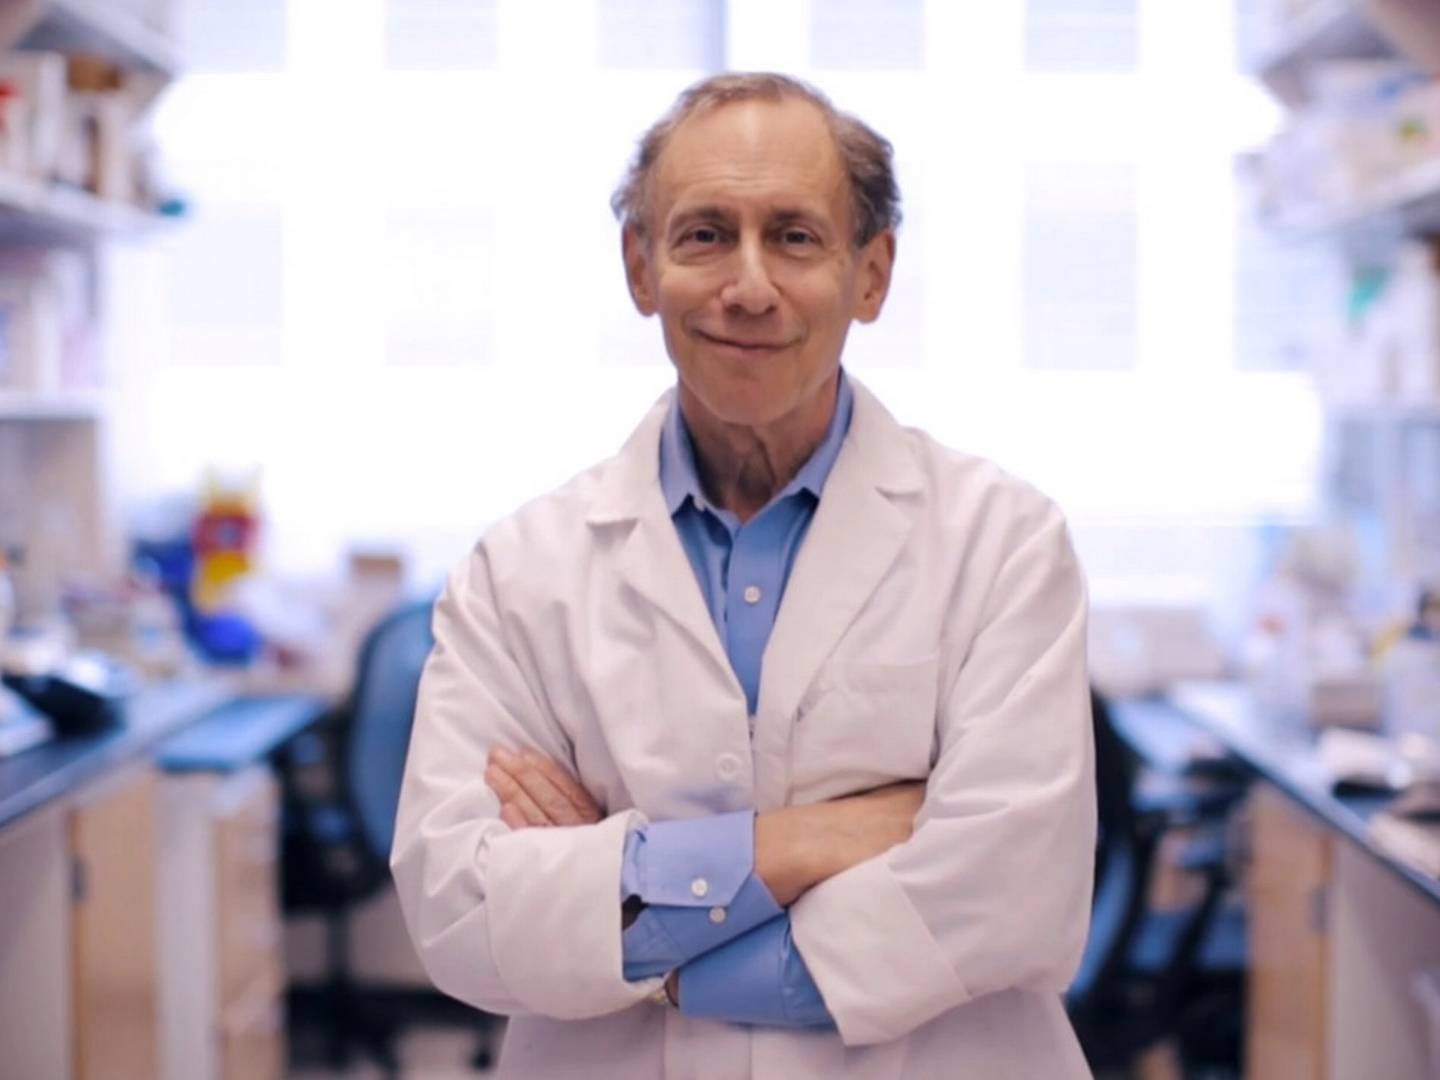 Dr. Robert Langer is currently a professor at the Massachusetts Institute of Technology (MIT). | Photo: Science History Institute